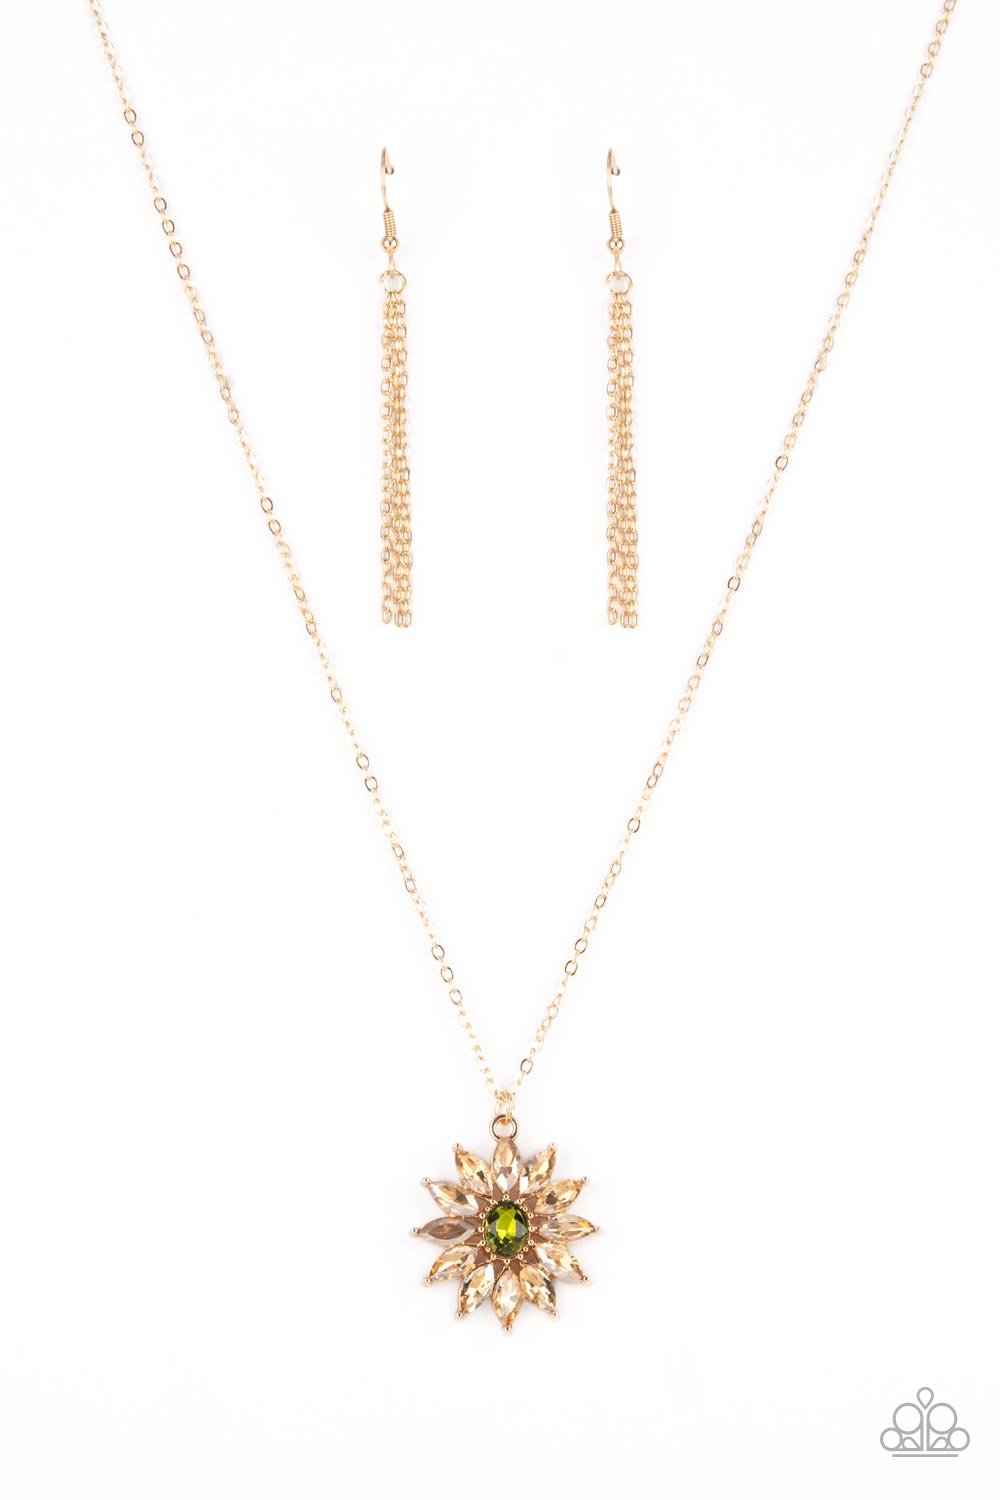 Formal Florals Gold Inspirational Necklace - Paparazzi Accessories  Golden champagne marquise cut rhinestones fan out from an oval green rhinestone center, creating a fabulous floral pendant at the bottom of a dainty gold chain. Features an adjustable clasp closure.  Sold as one individual necklace. Includes one pair of matching earrings.